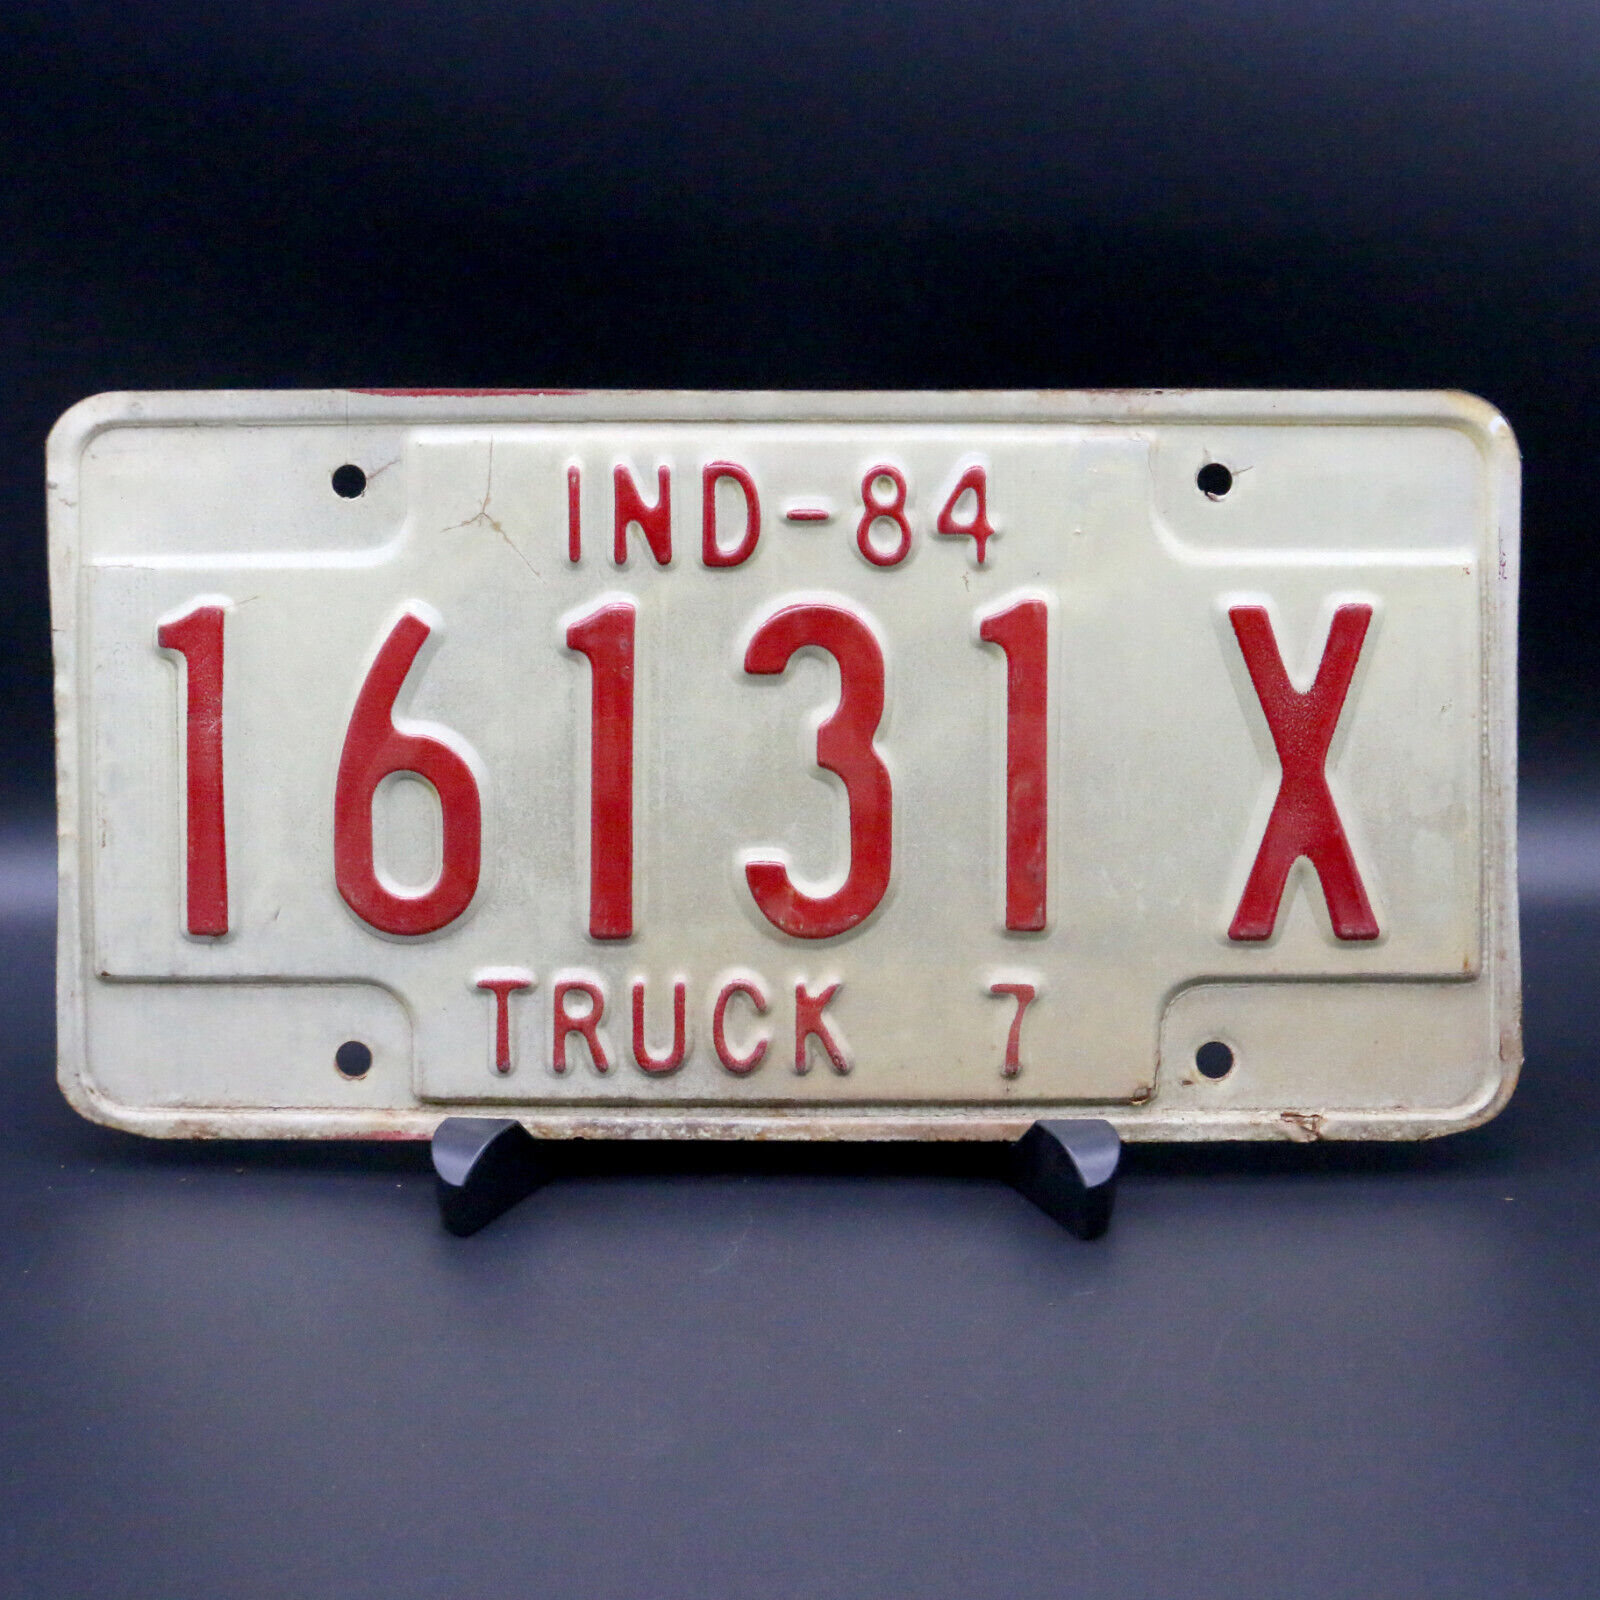 1984 Indiana 16131X - TRUCK 7 (7 Ton) License Plate Expired Car Tag - White Red